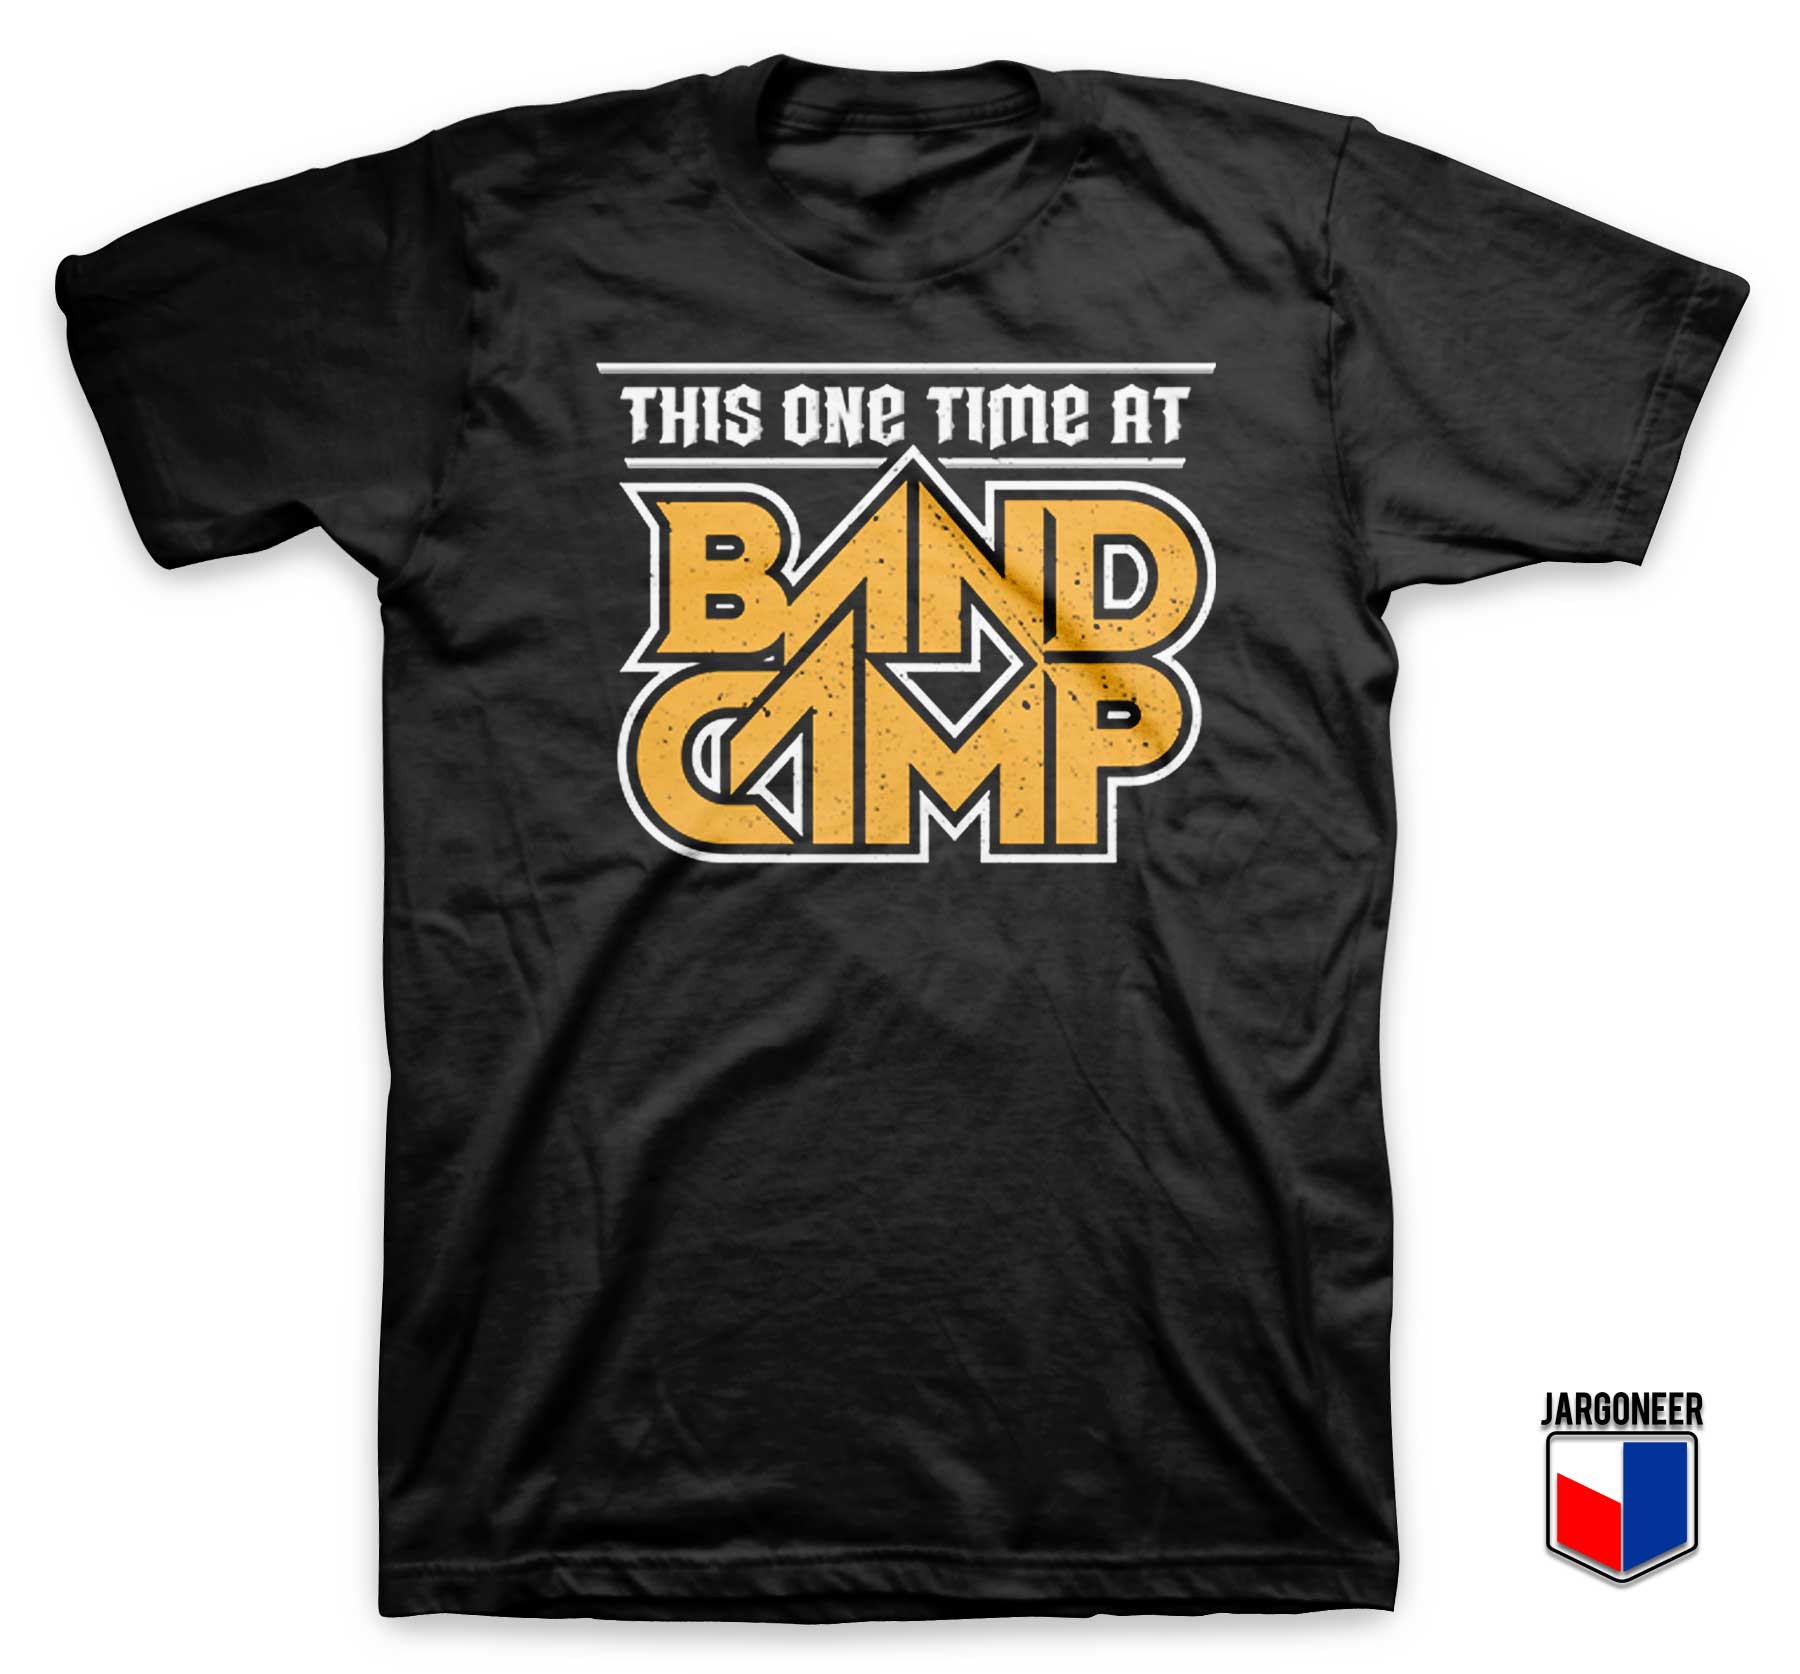 This One Time At Band Camp T Shirt - Shop Unique Graphic Cool Shirt Designs